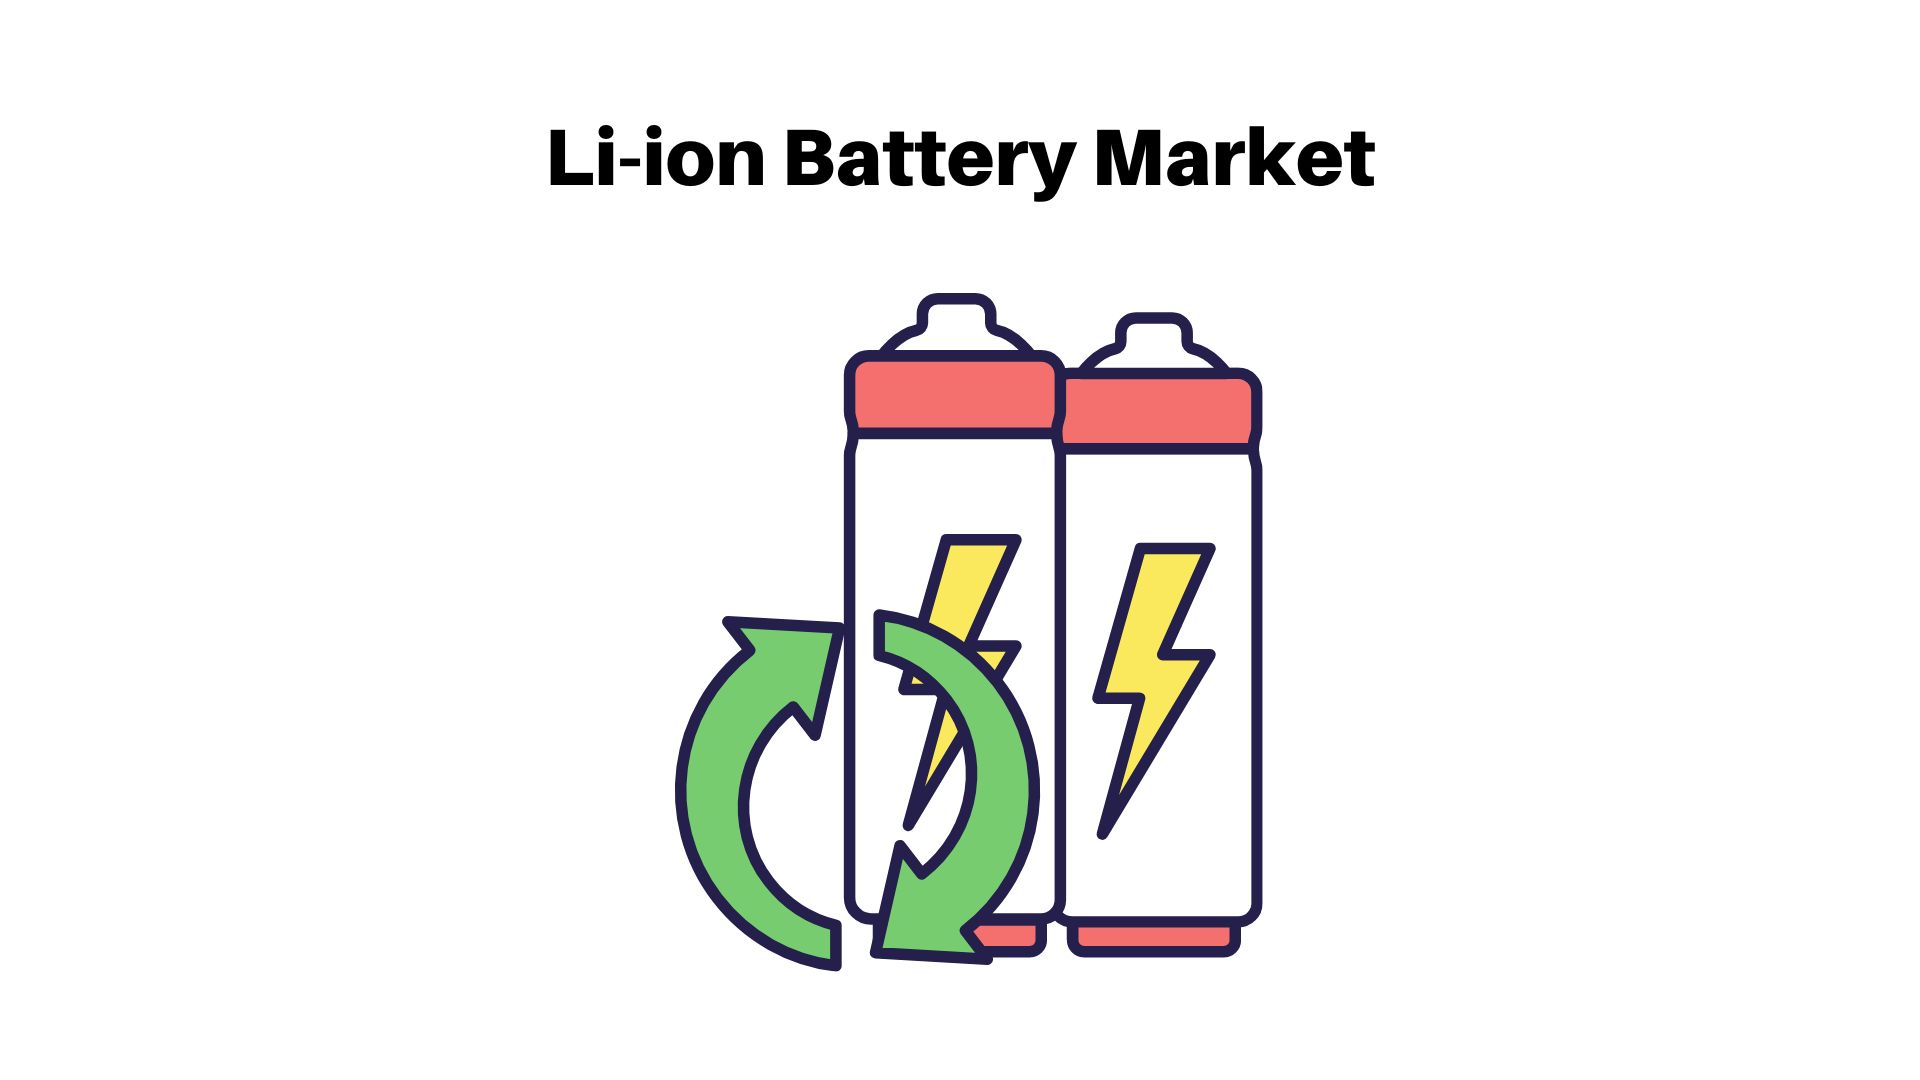 22.00% CAGR For Li-ion Battery Market for E-bikes Market Size to Reach USD 30.66 Billion by 2032